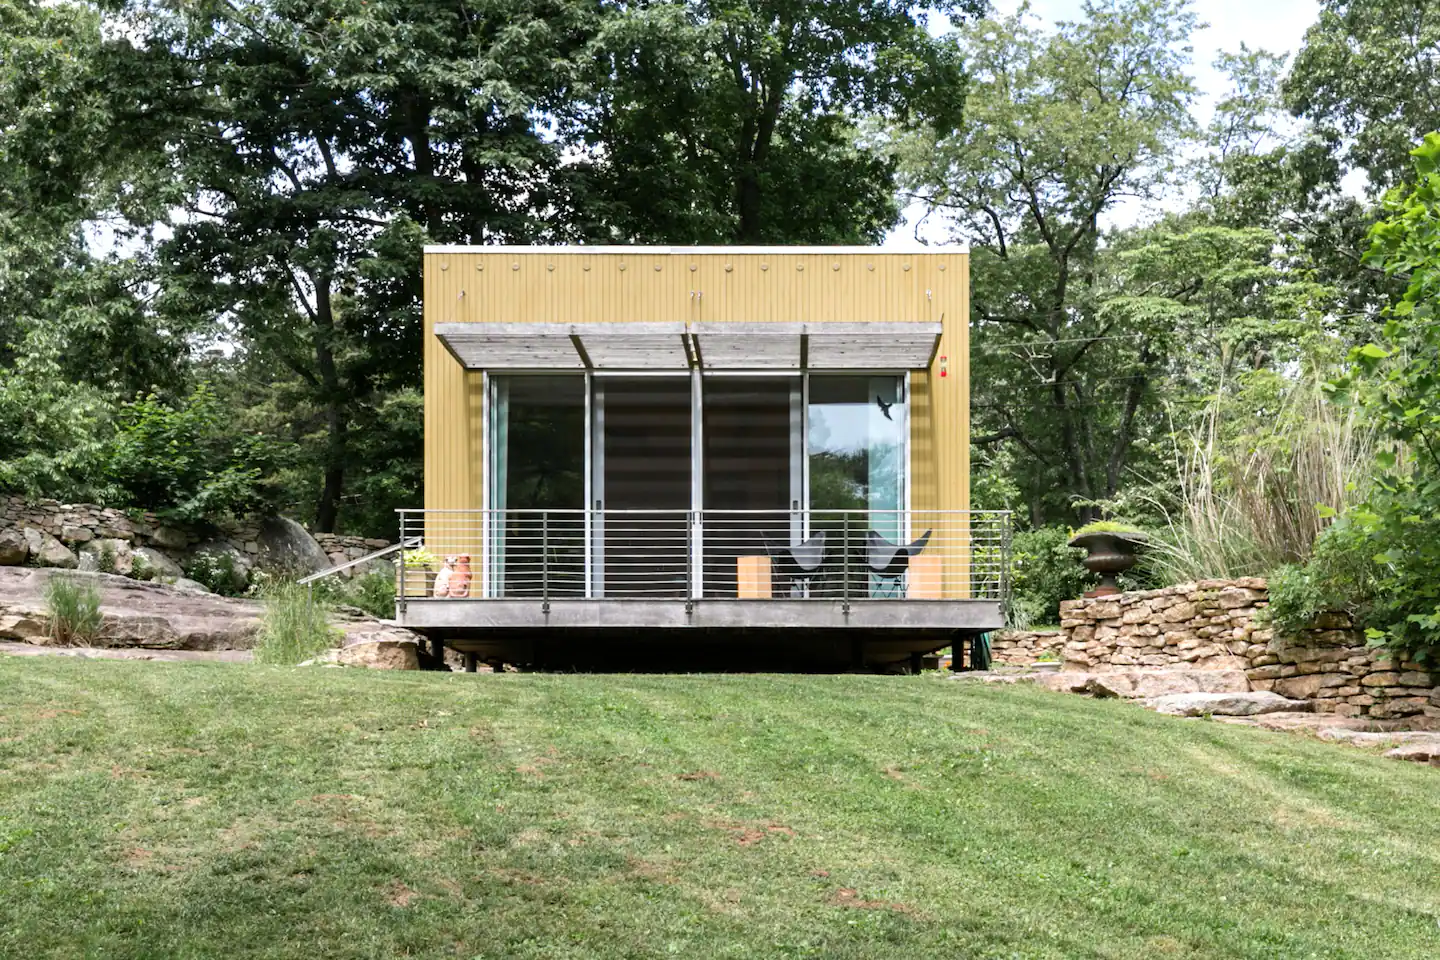 Metal Clad Guesthouse, one of the best Airbnbs in Connecticut